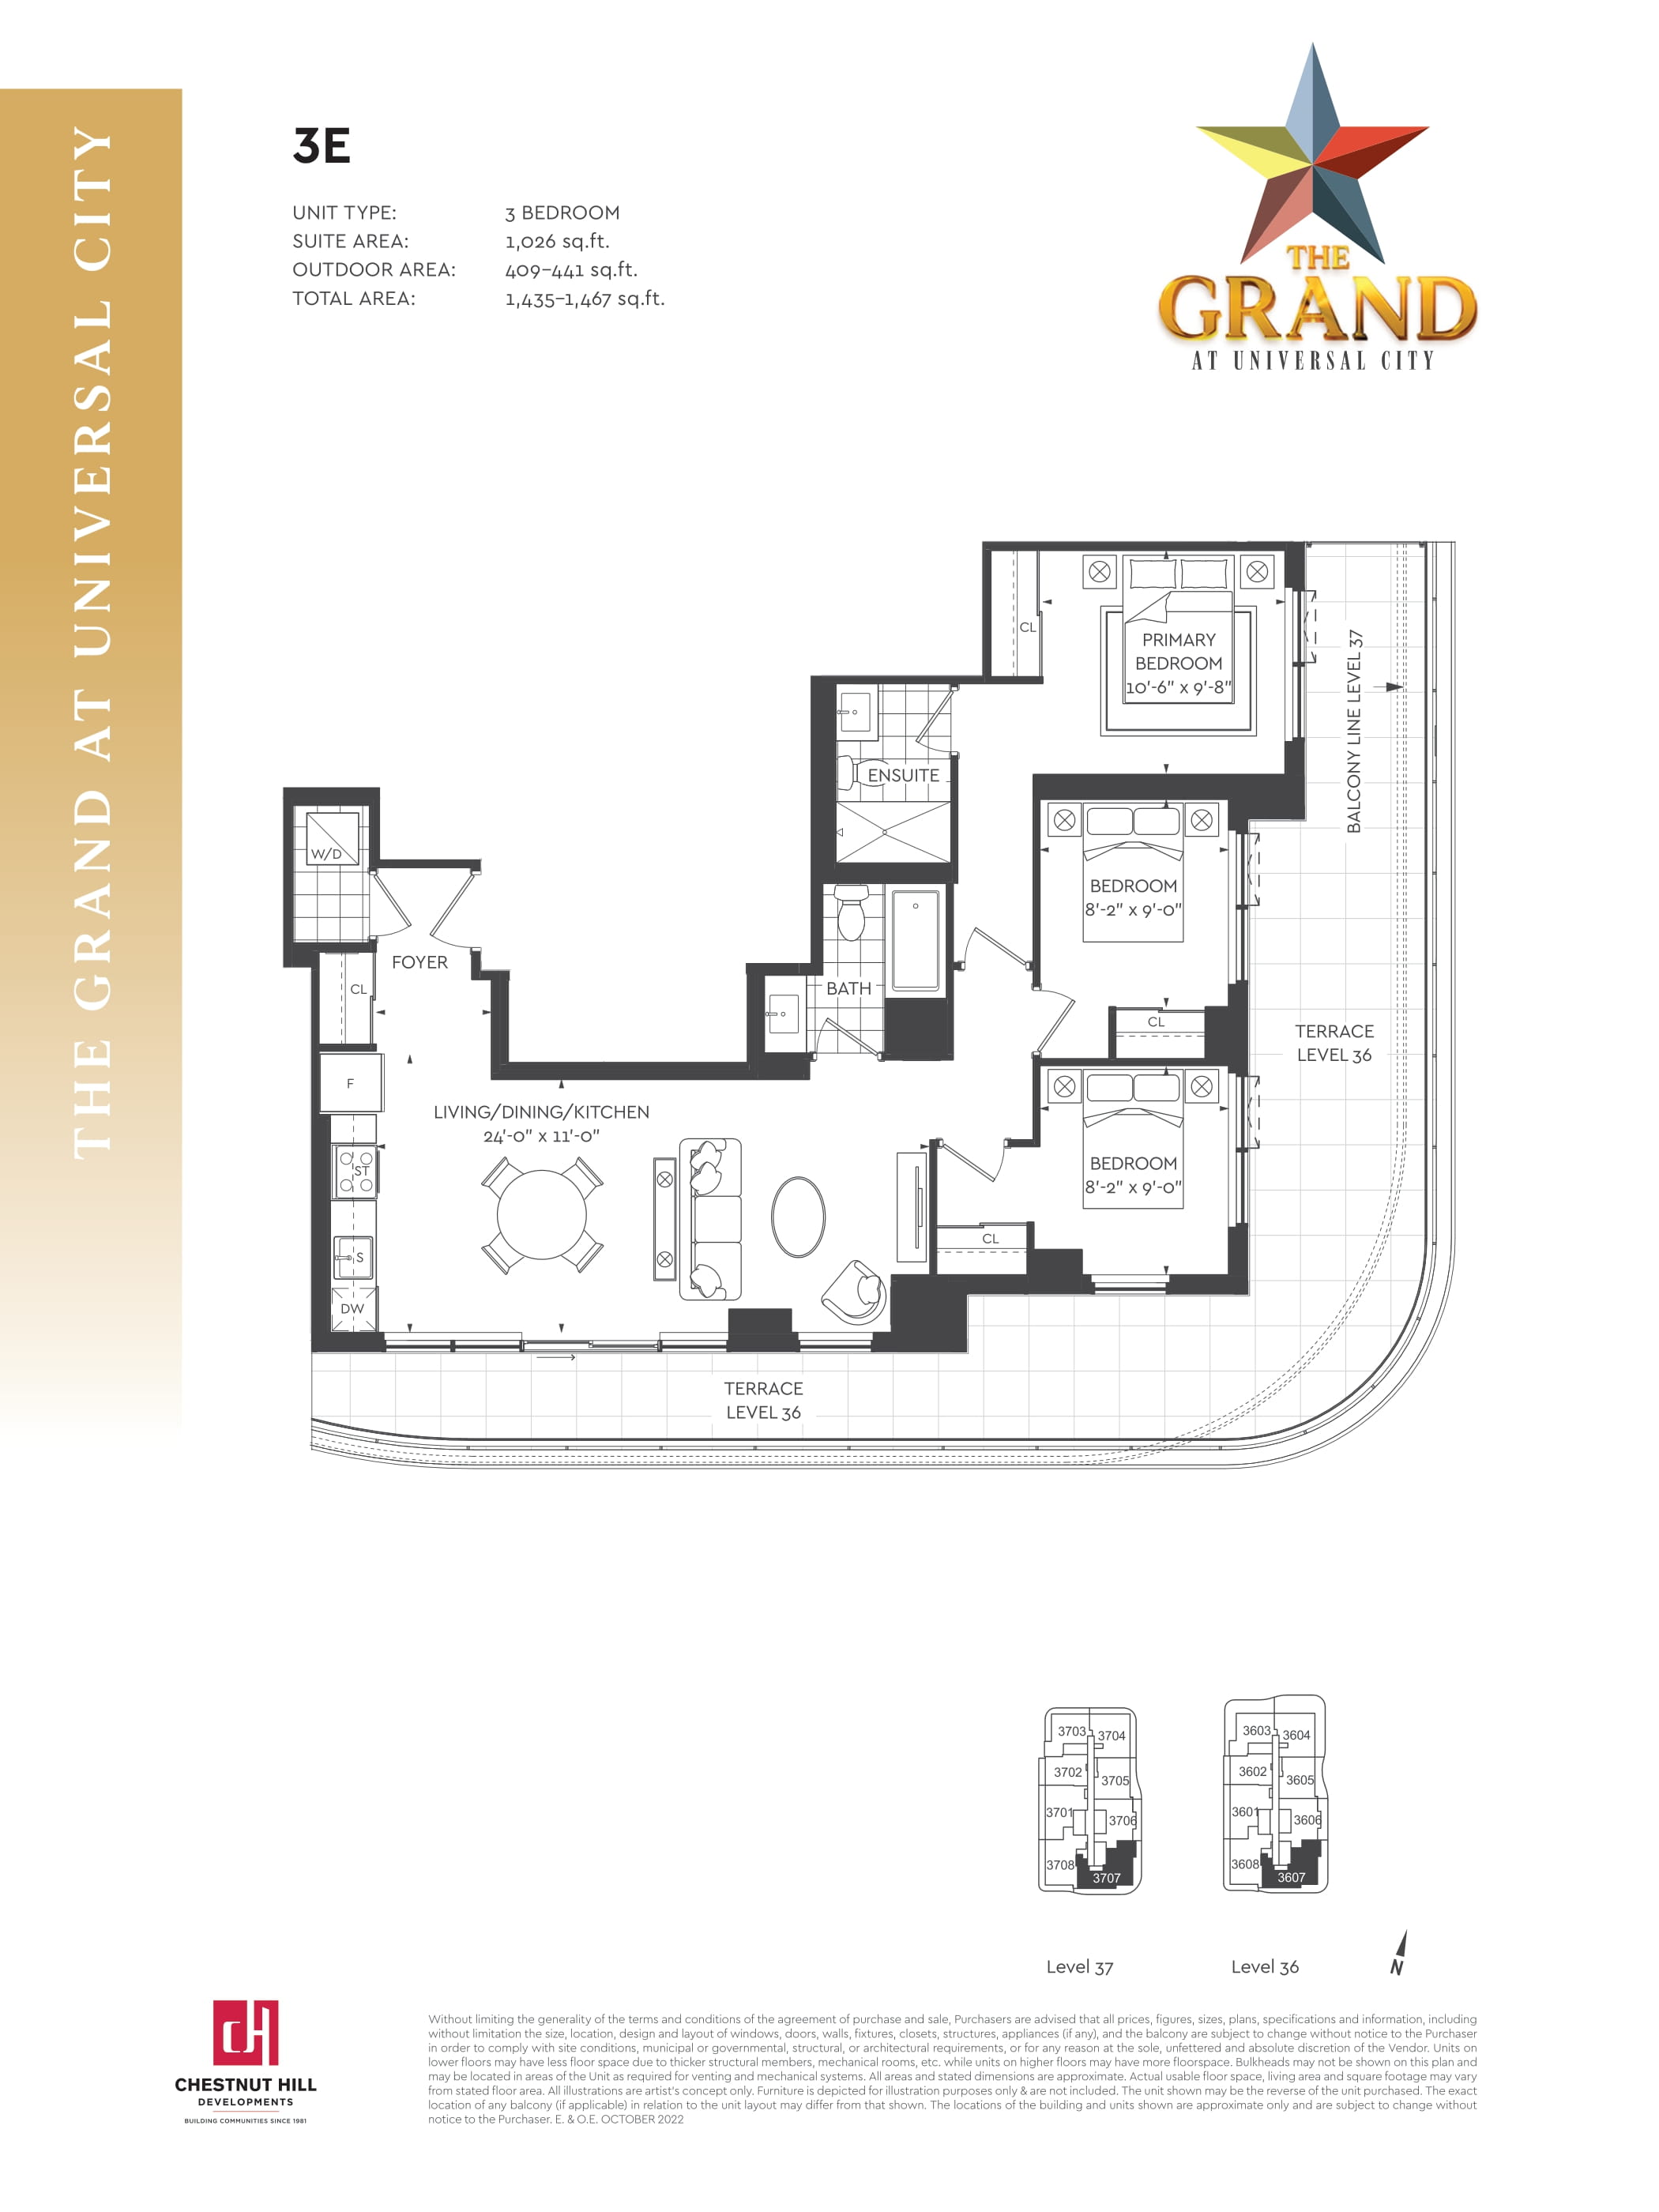  Floor Plan of The Grand at Universal City with undefined beds